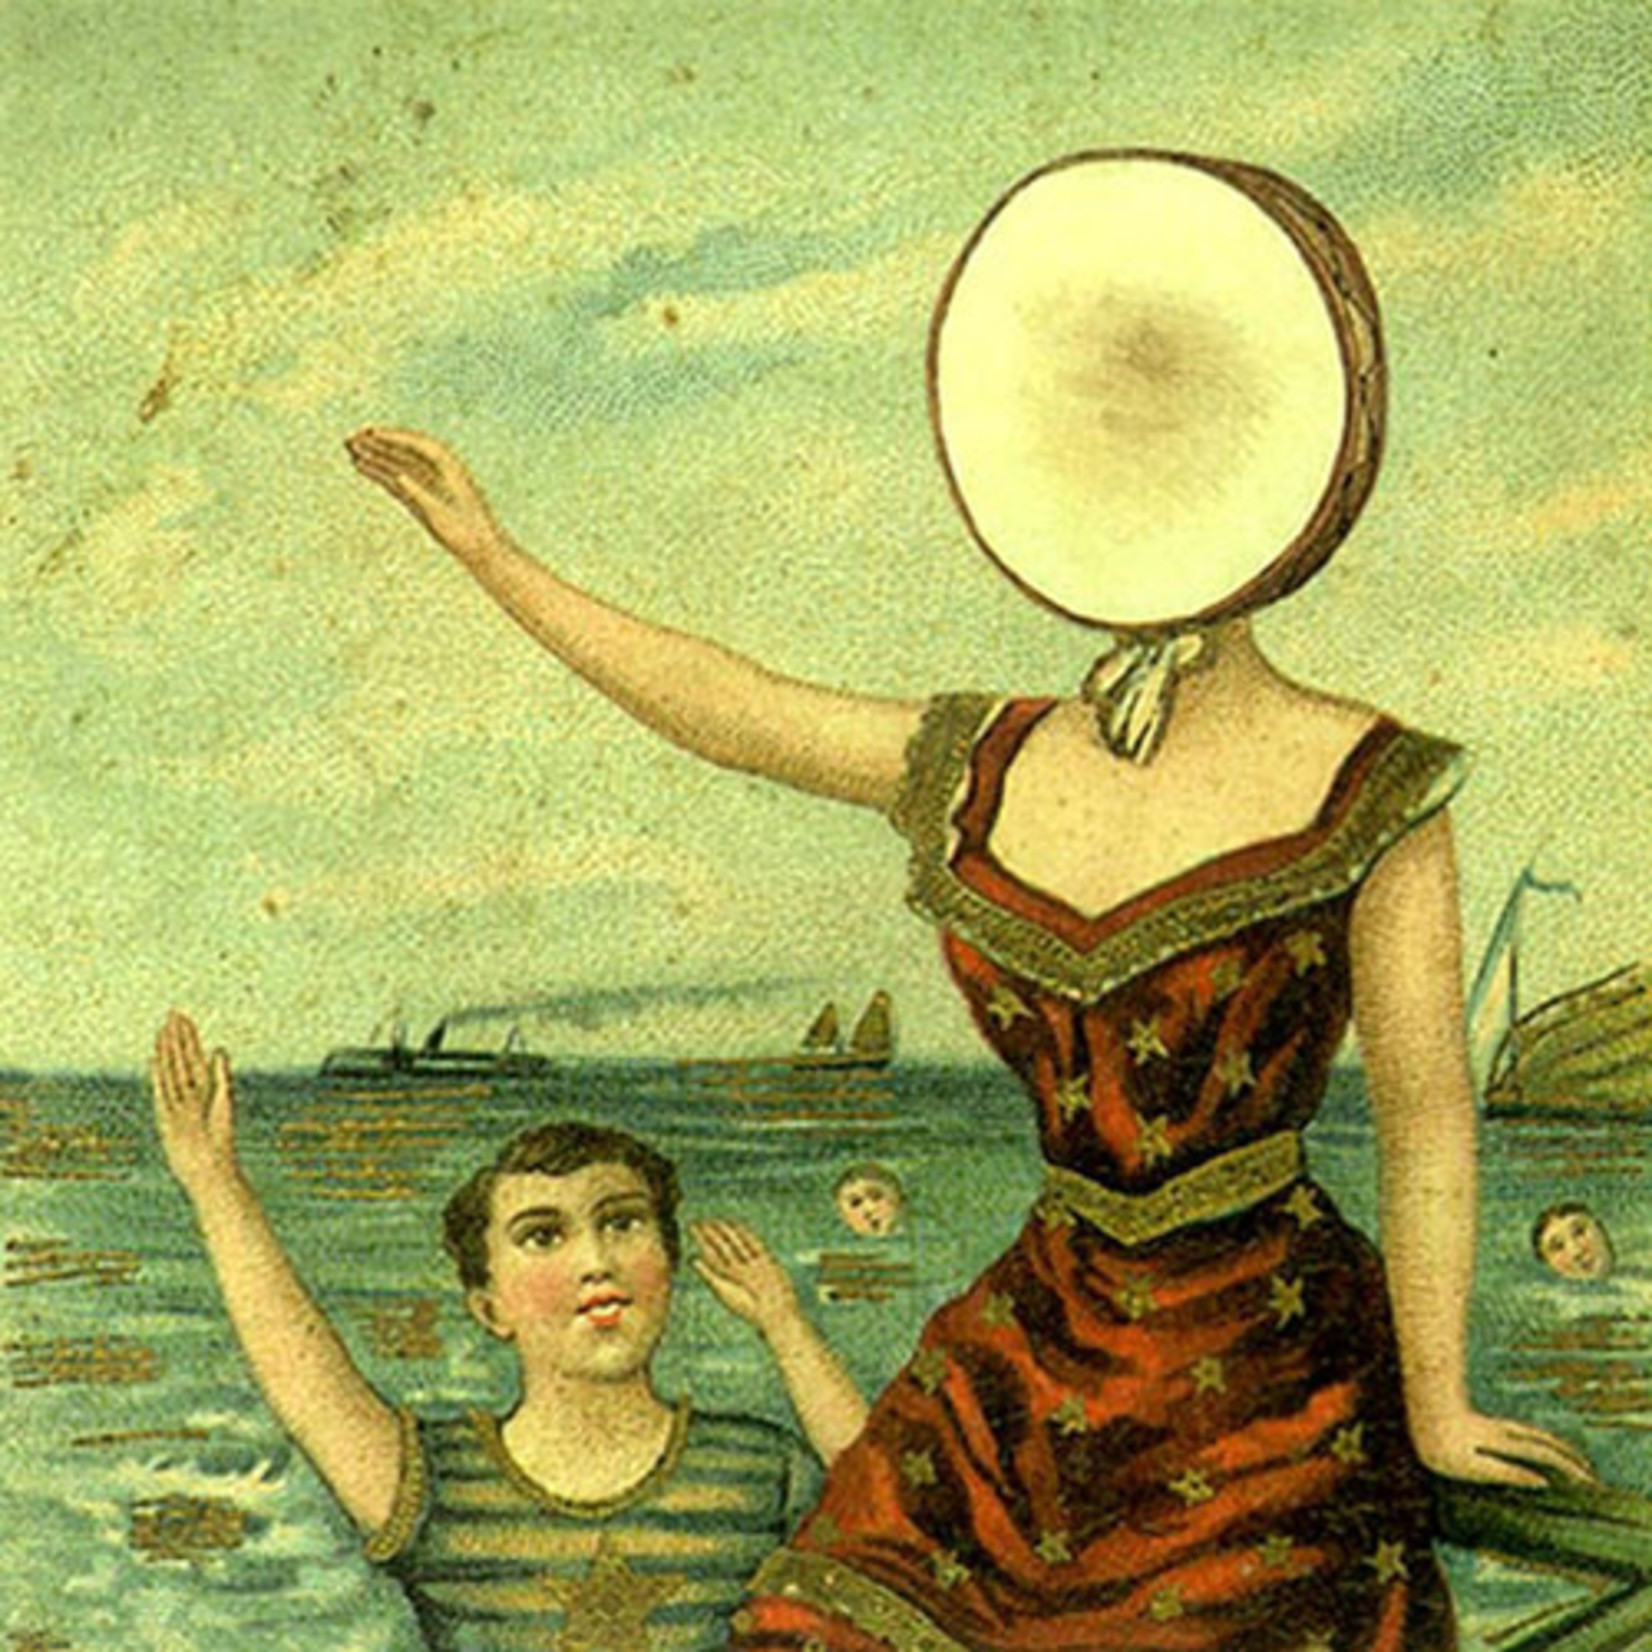 [New] Neutral Milk Hotel - In the Aeroplane Over the Sea